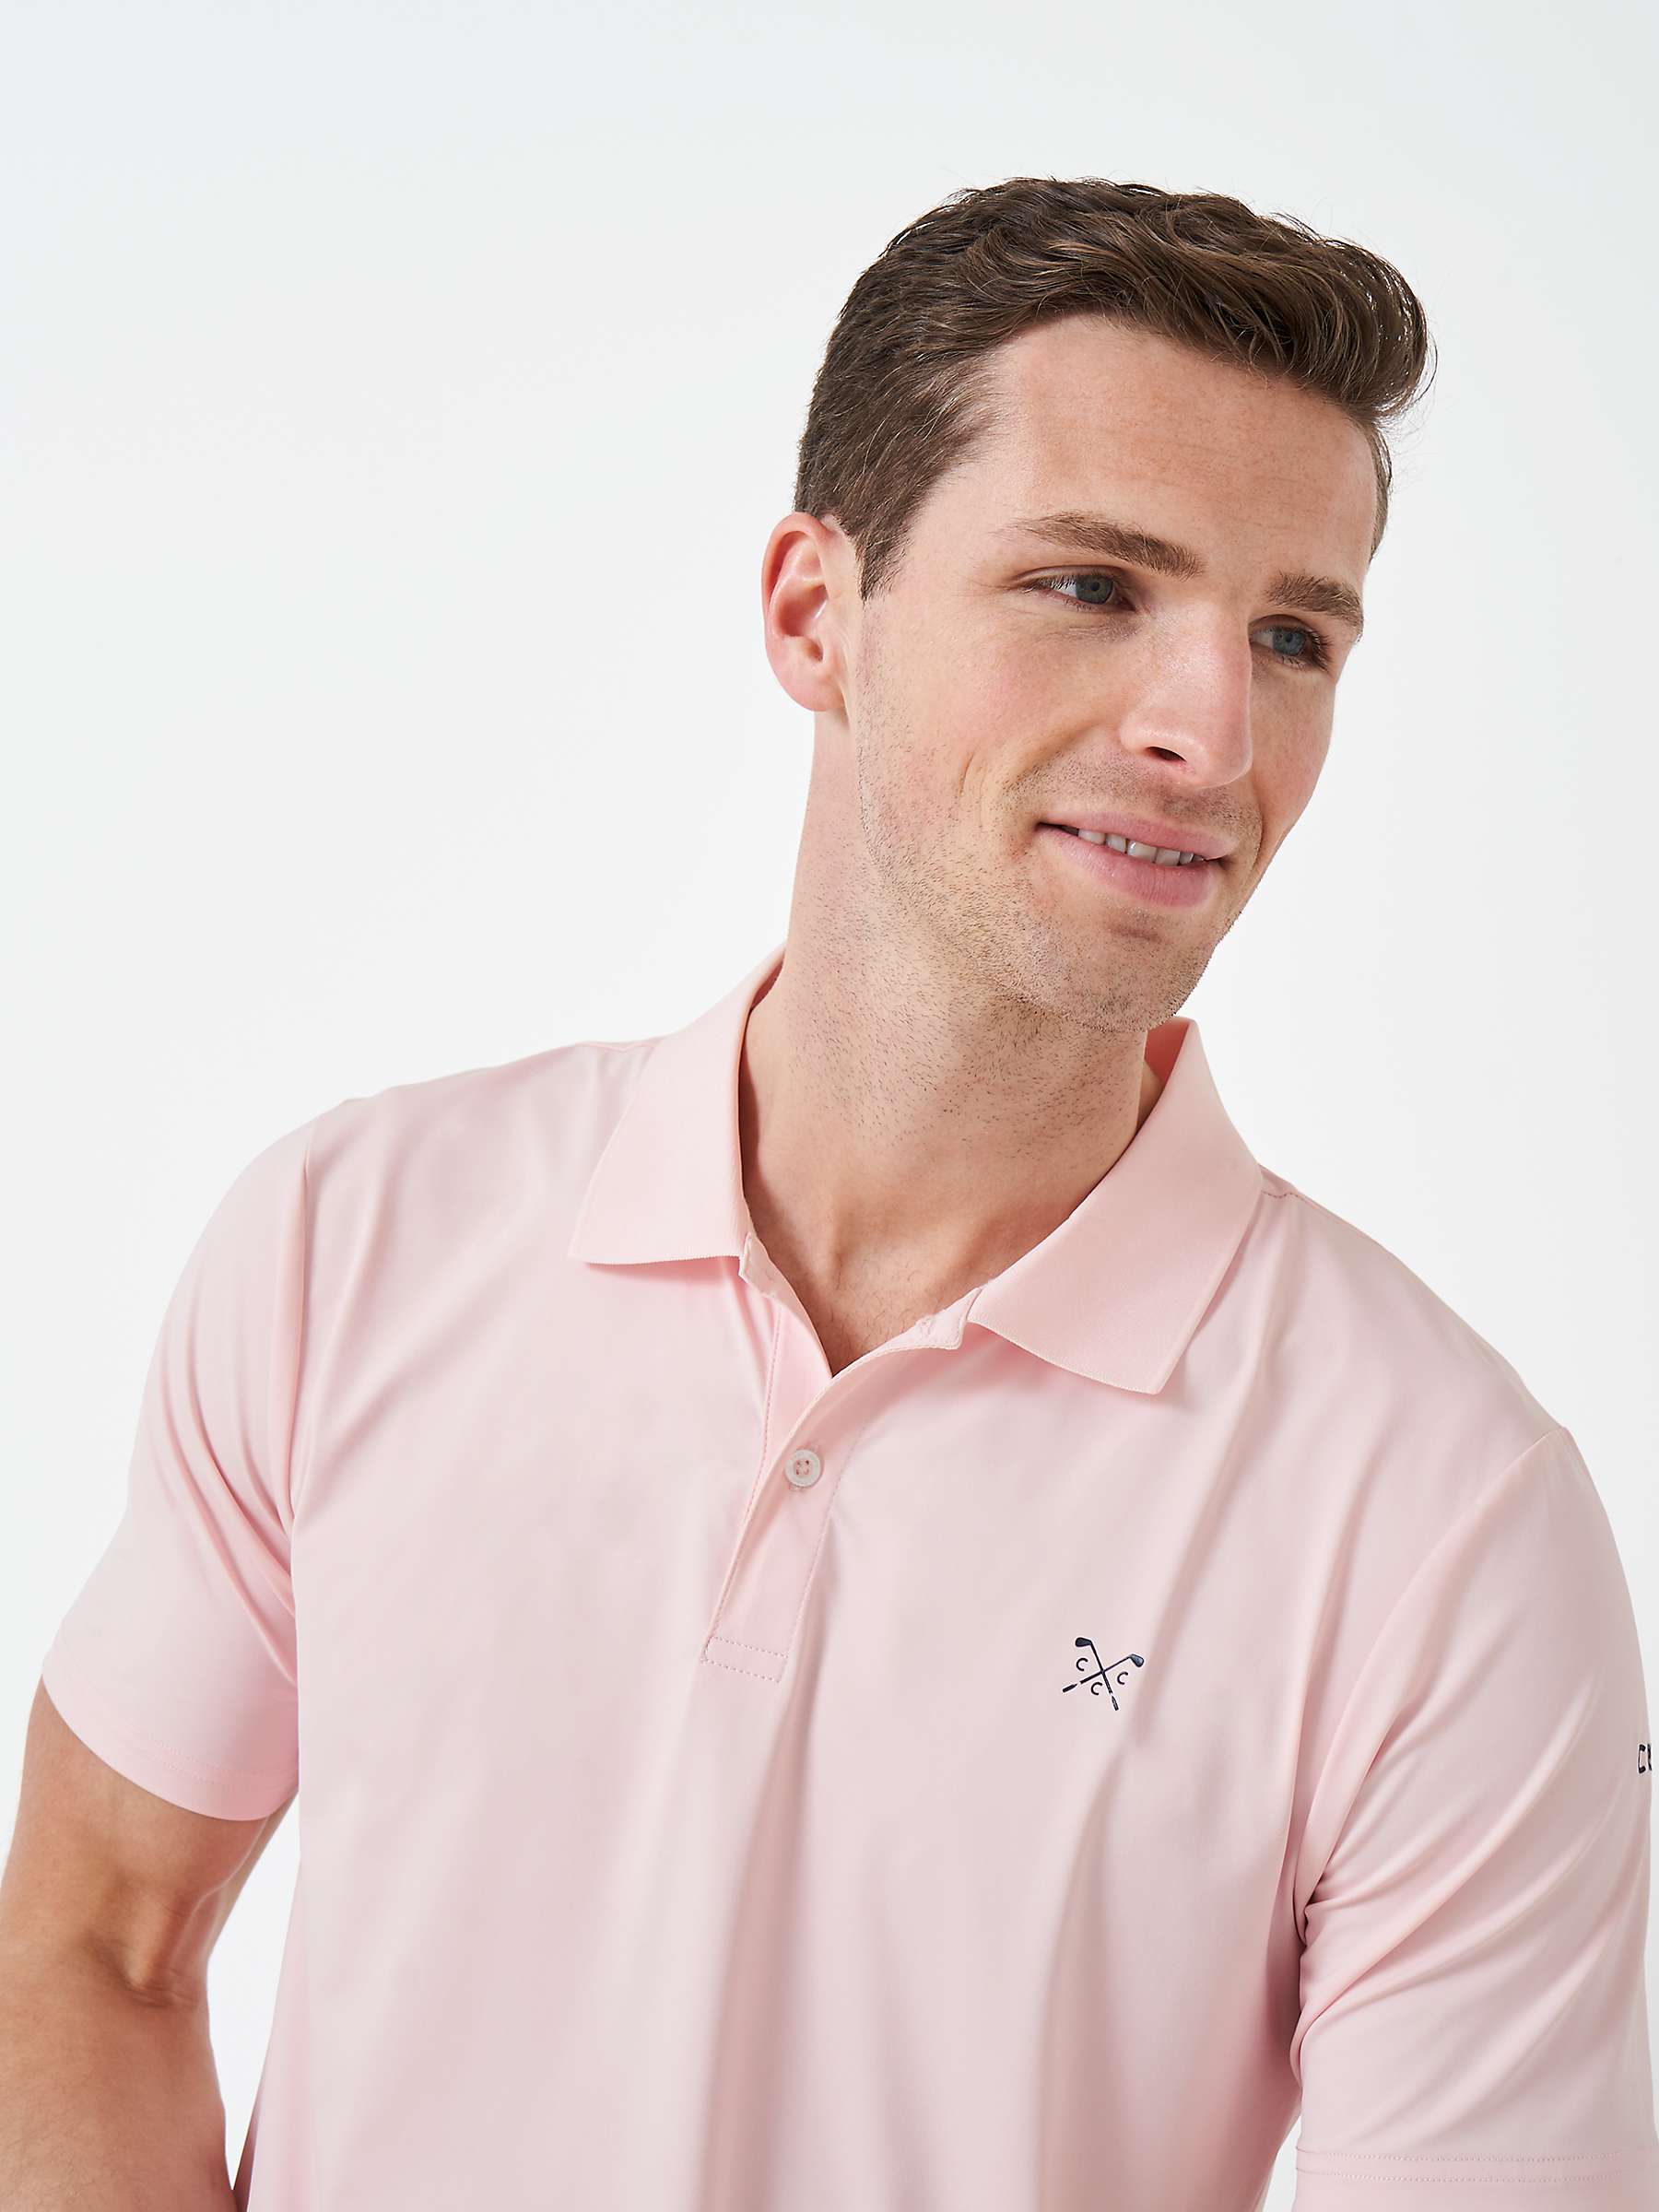 Buy Crew Clothing Smart Golf Polo Shirt Online at johnlewis.com